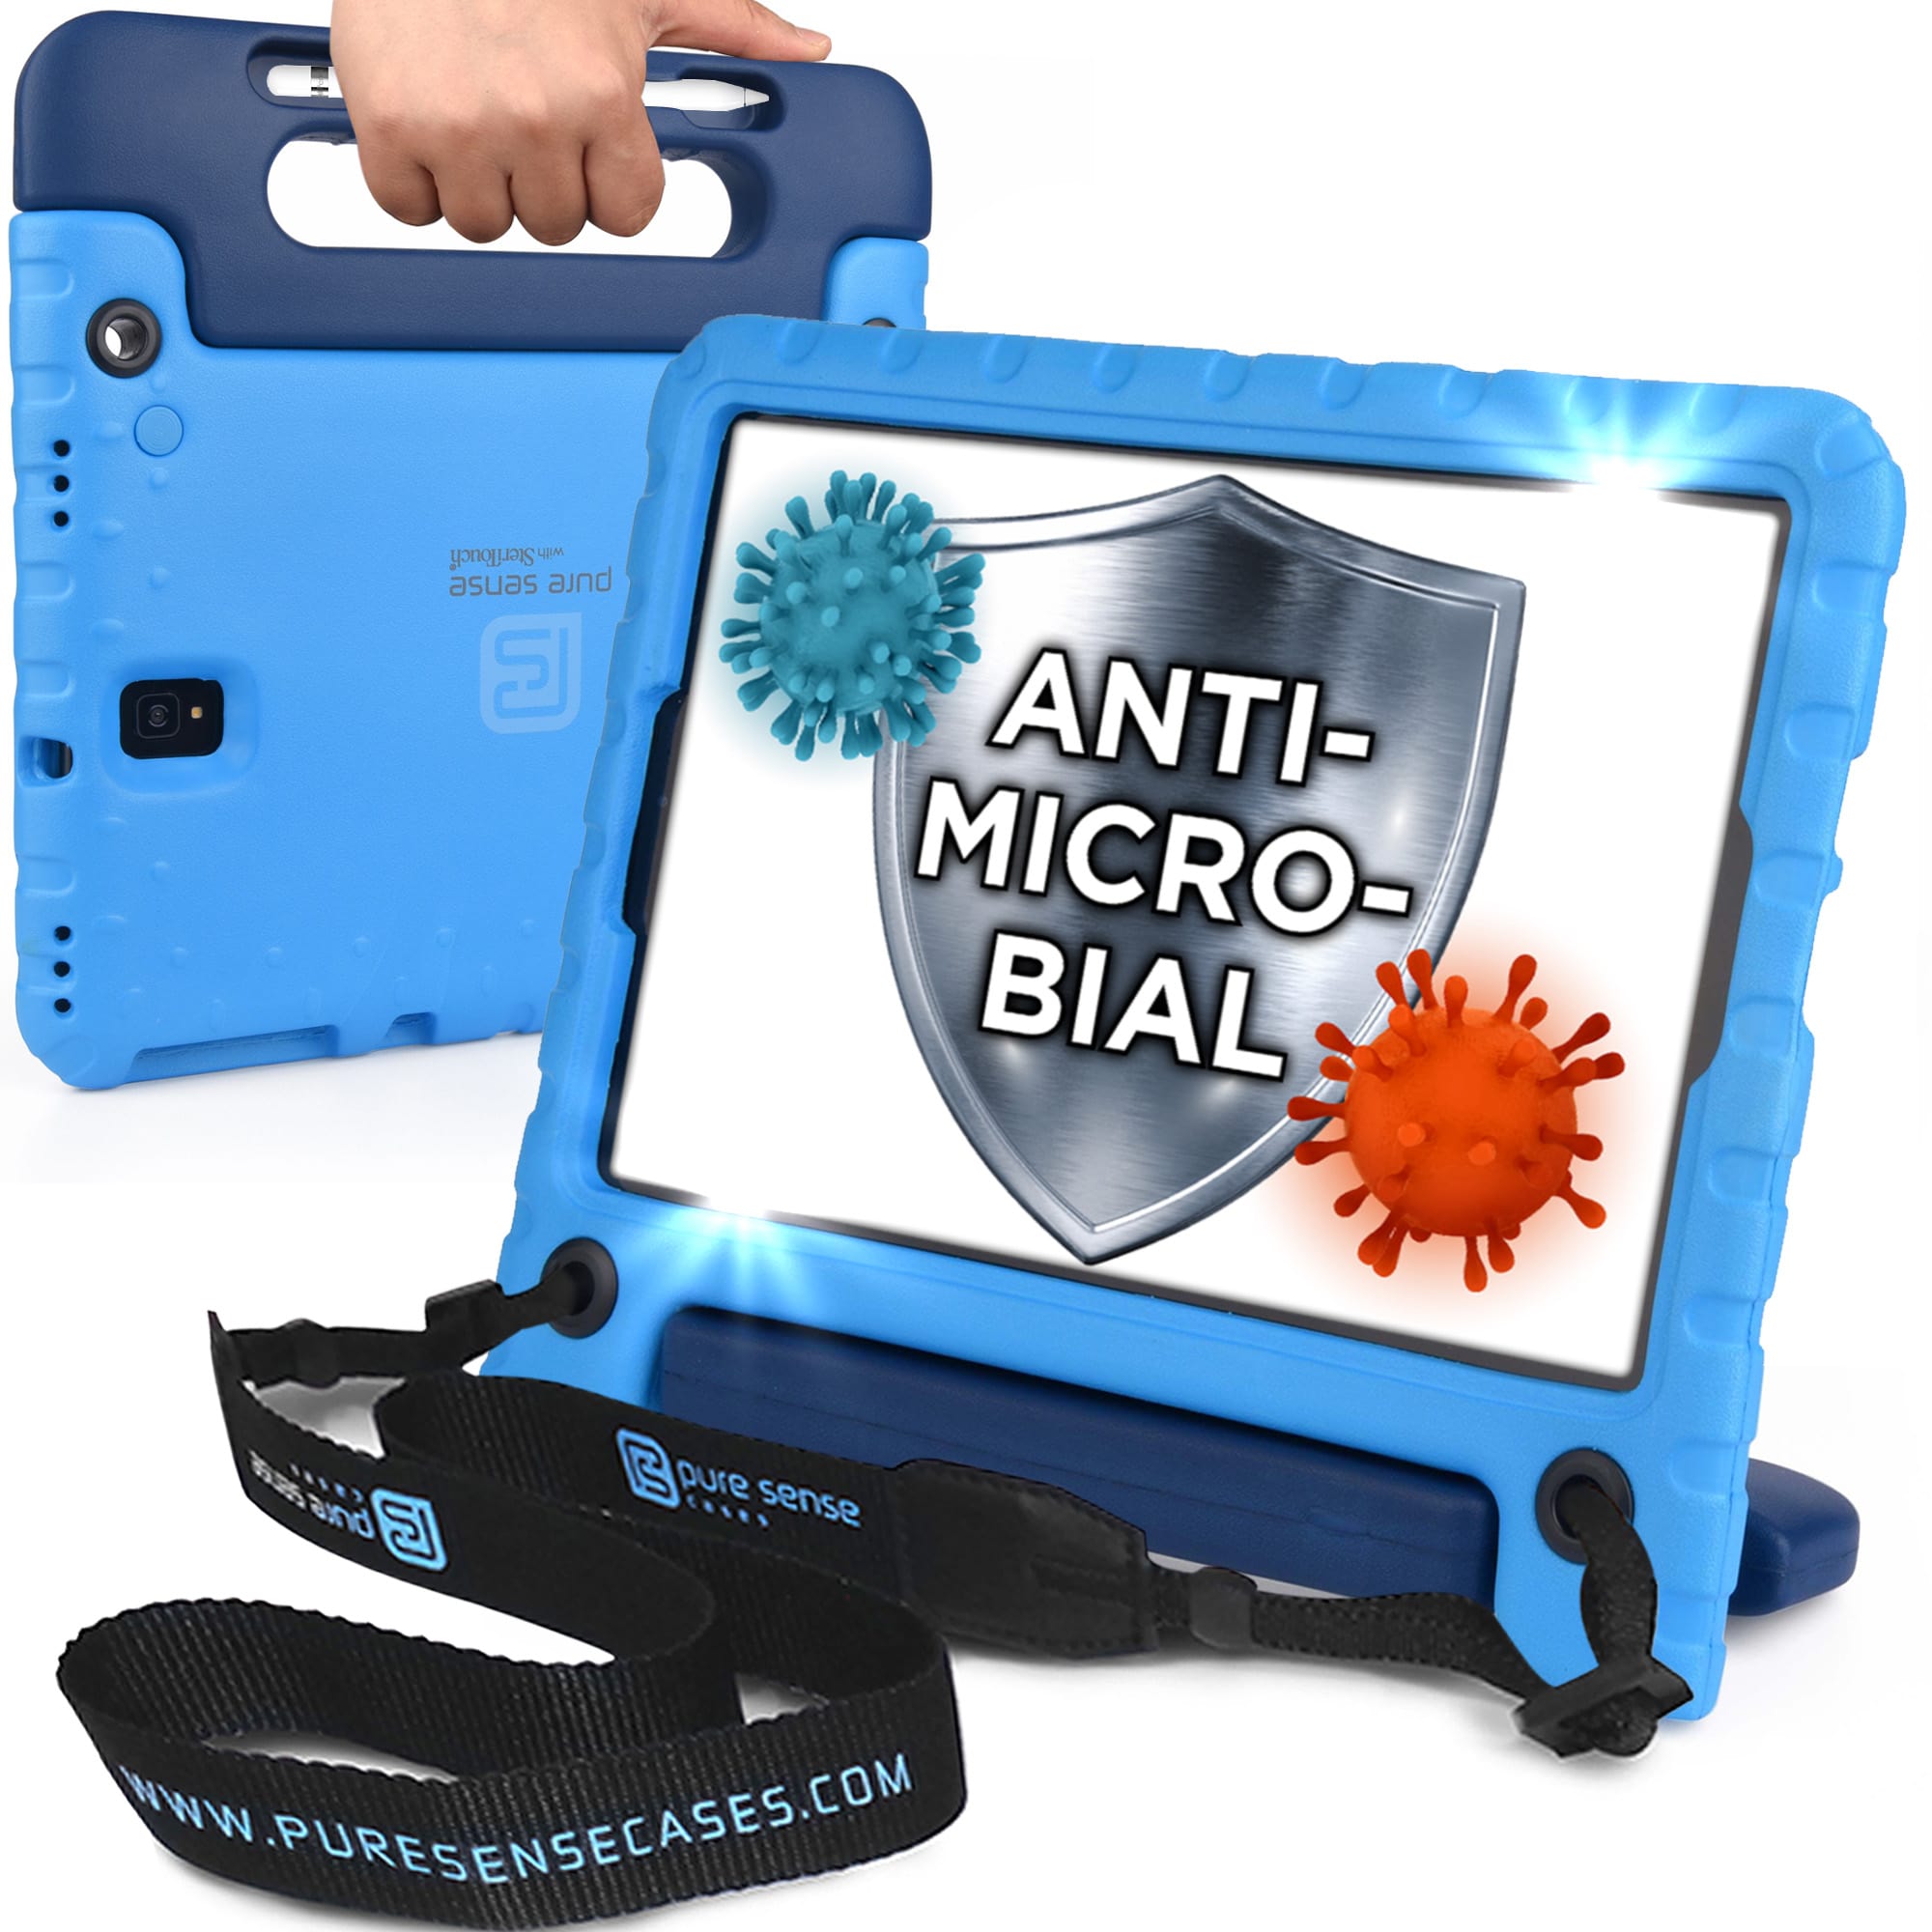 Buddy Antibacterial Protective Kids case for Samsung Galaxy Tab E 8.0 // Handle+Stand, Shoulder Strap, Screen Spray